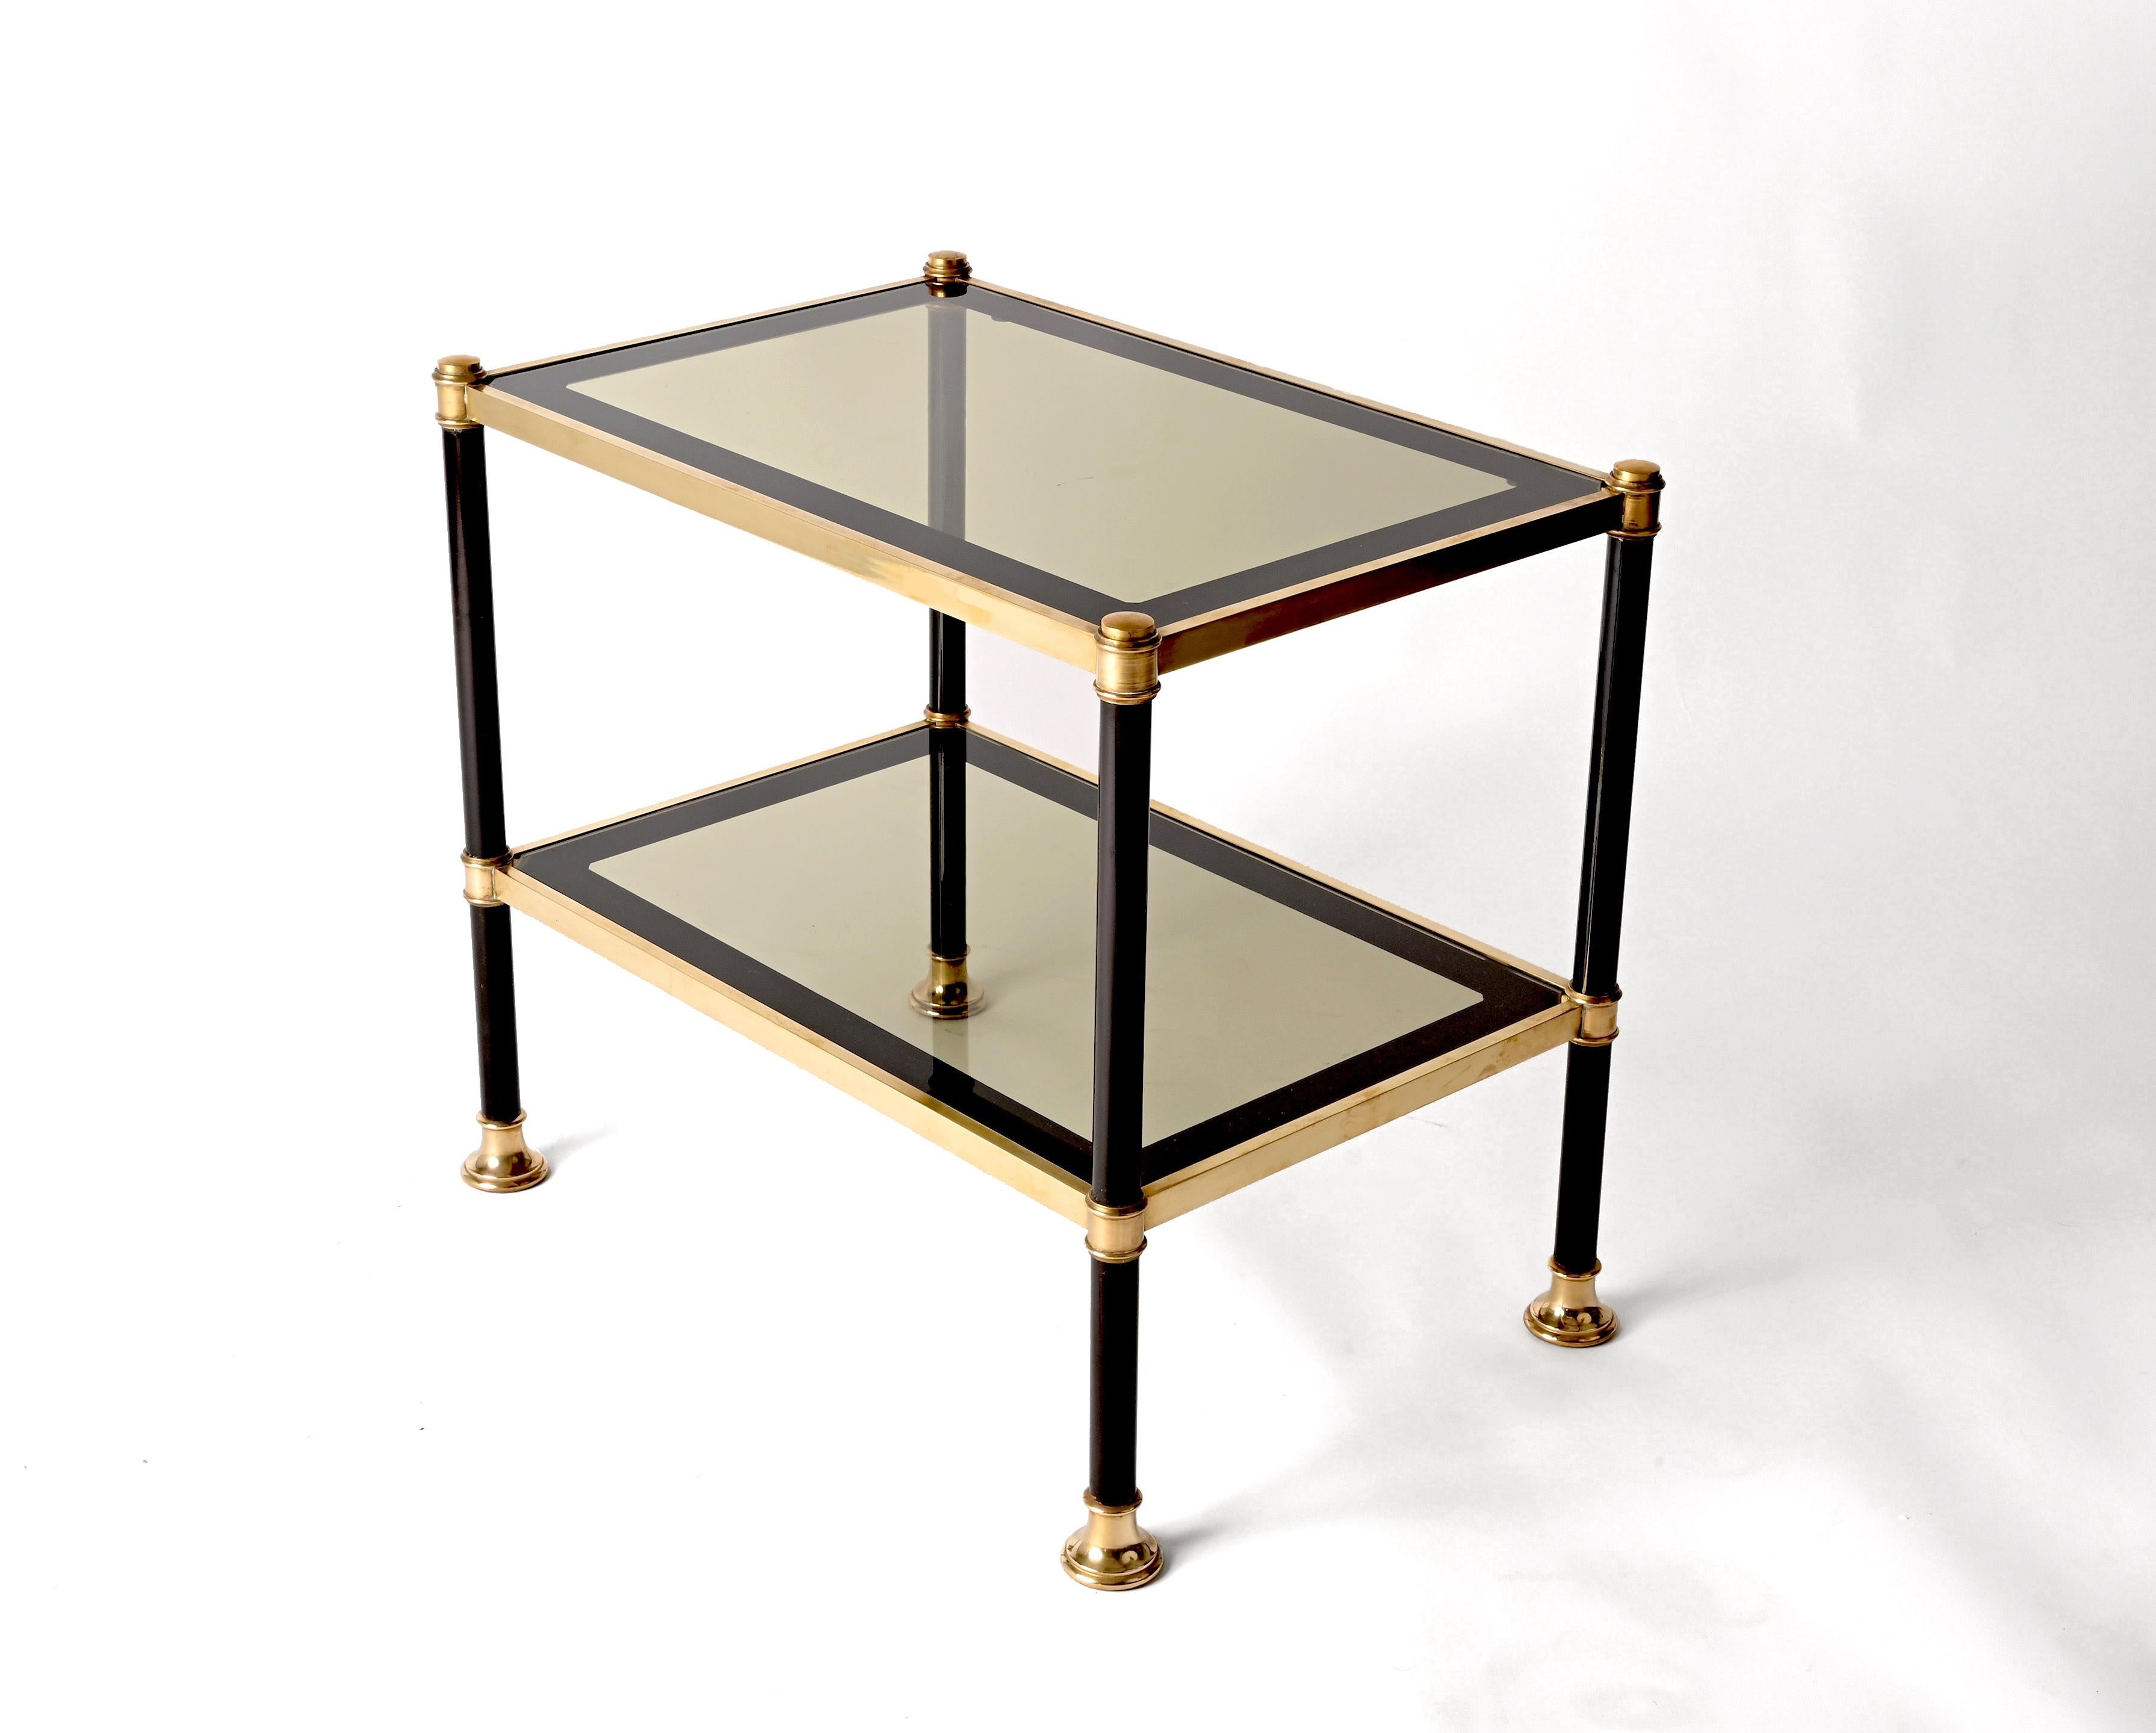 Midcentury Brass and Black Metal Rectangular Coffee Table with Smoked Glass 1970 For Sale 3